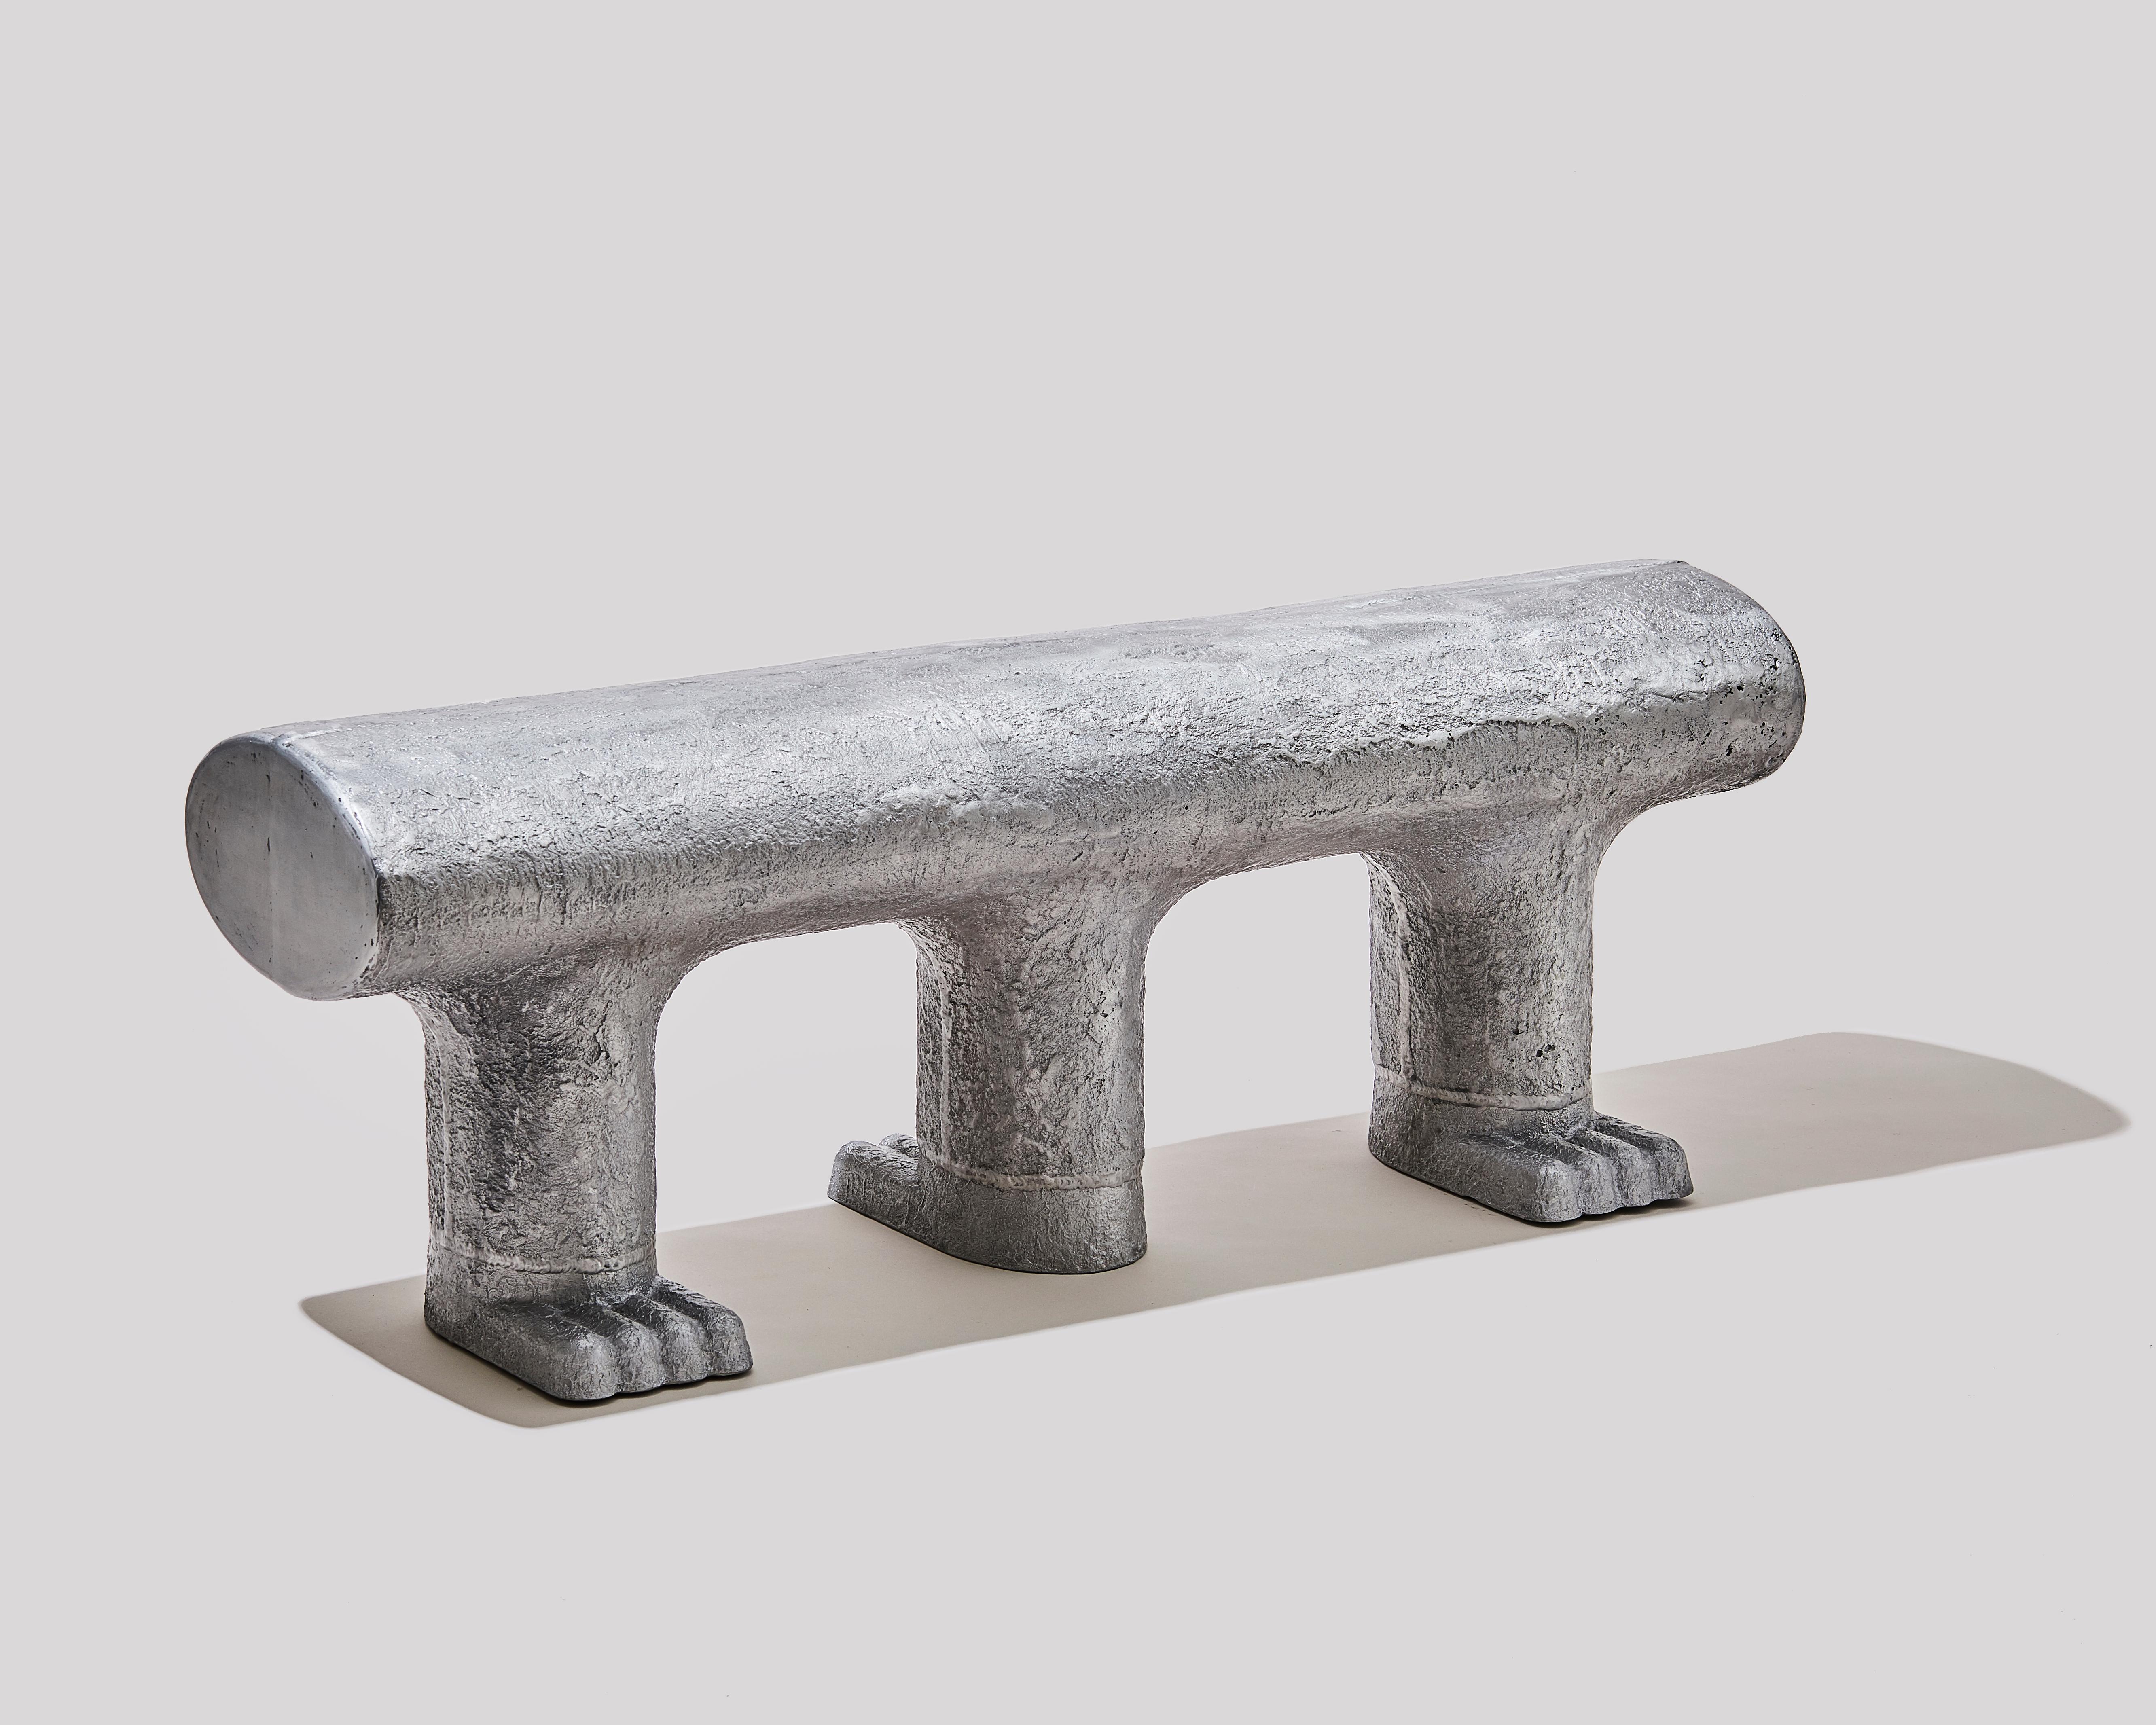 Paw bench by Hakmin Lee
Materials: Aluminium
Dimensions: 120 x 36 x 43 cm

Studio HAK is Seoul based studio led by designer Hakmin Lee, who has an ambition of creating our environment bit more humorous through everyday objects.

Studio HAK